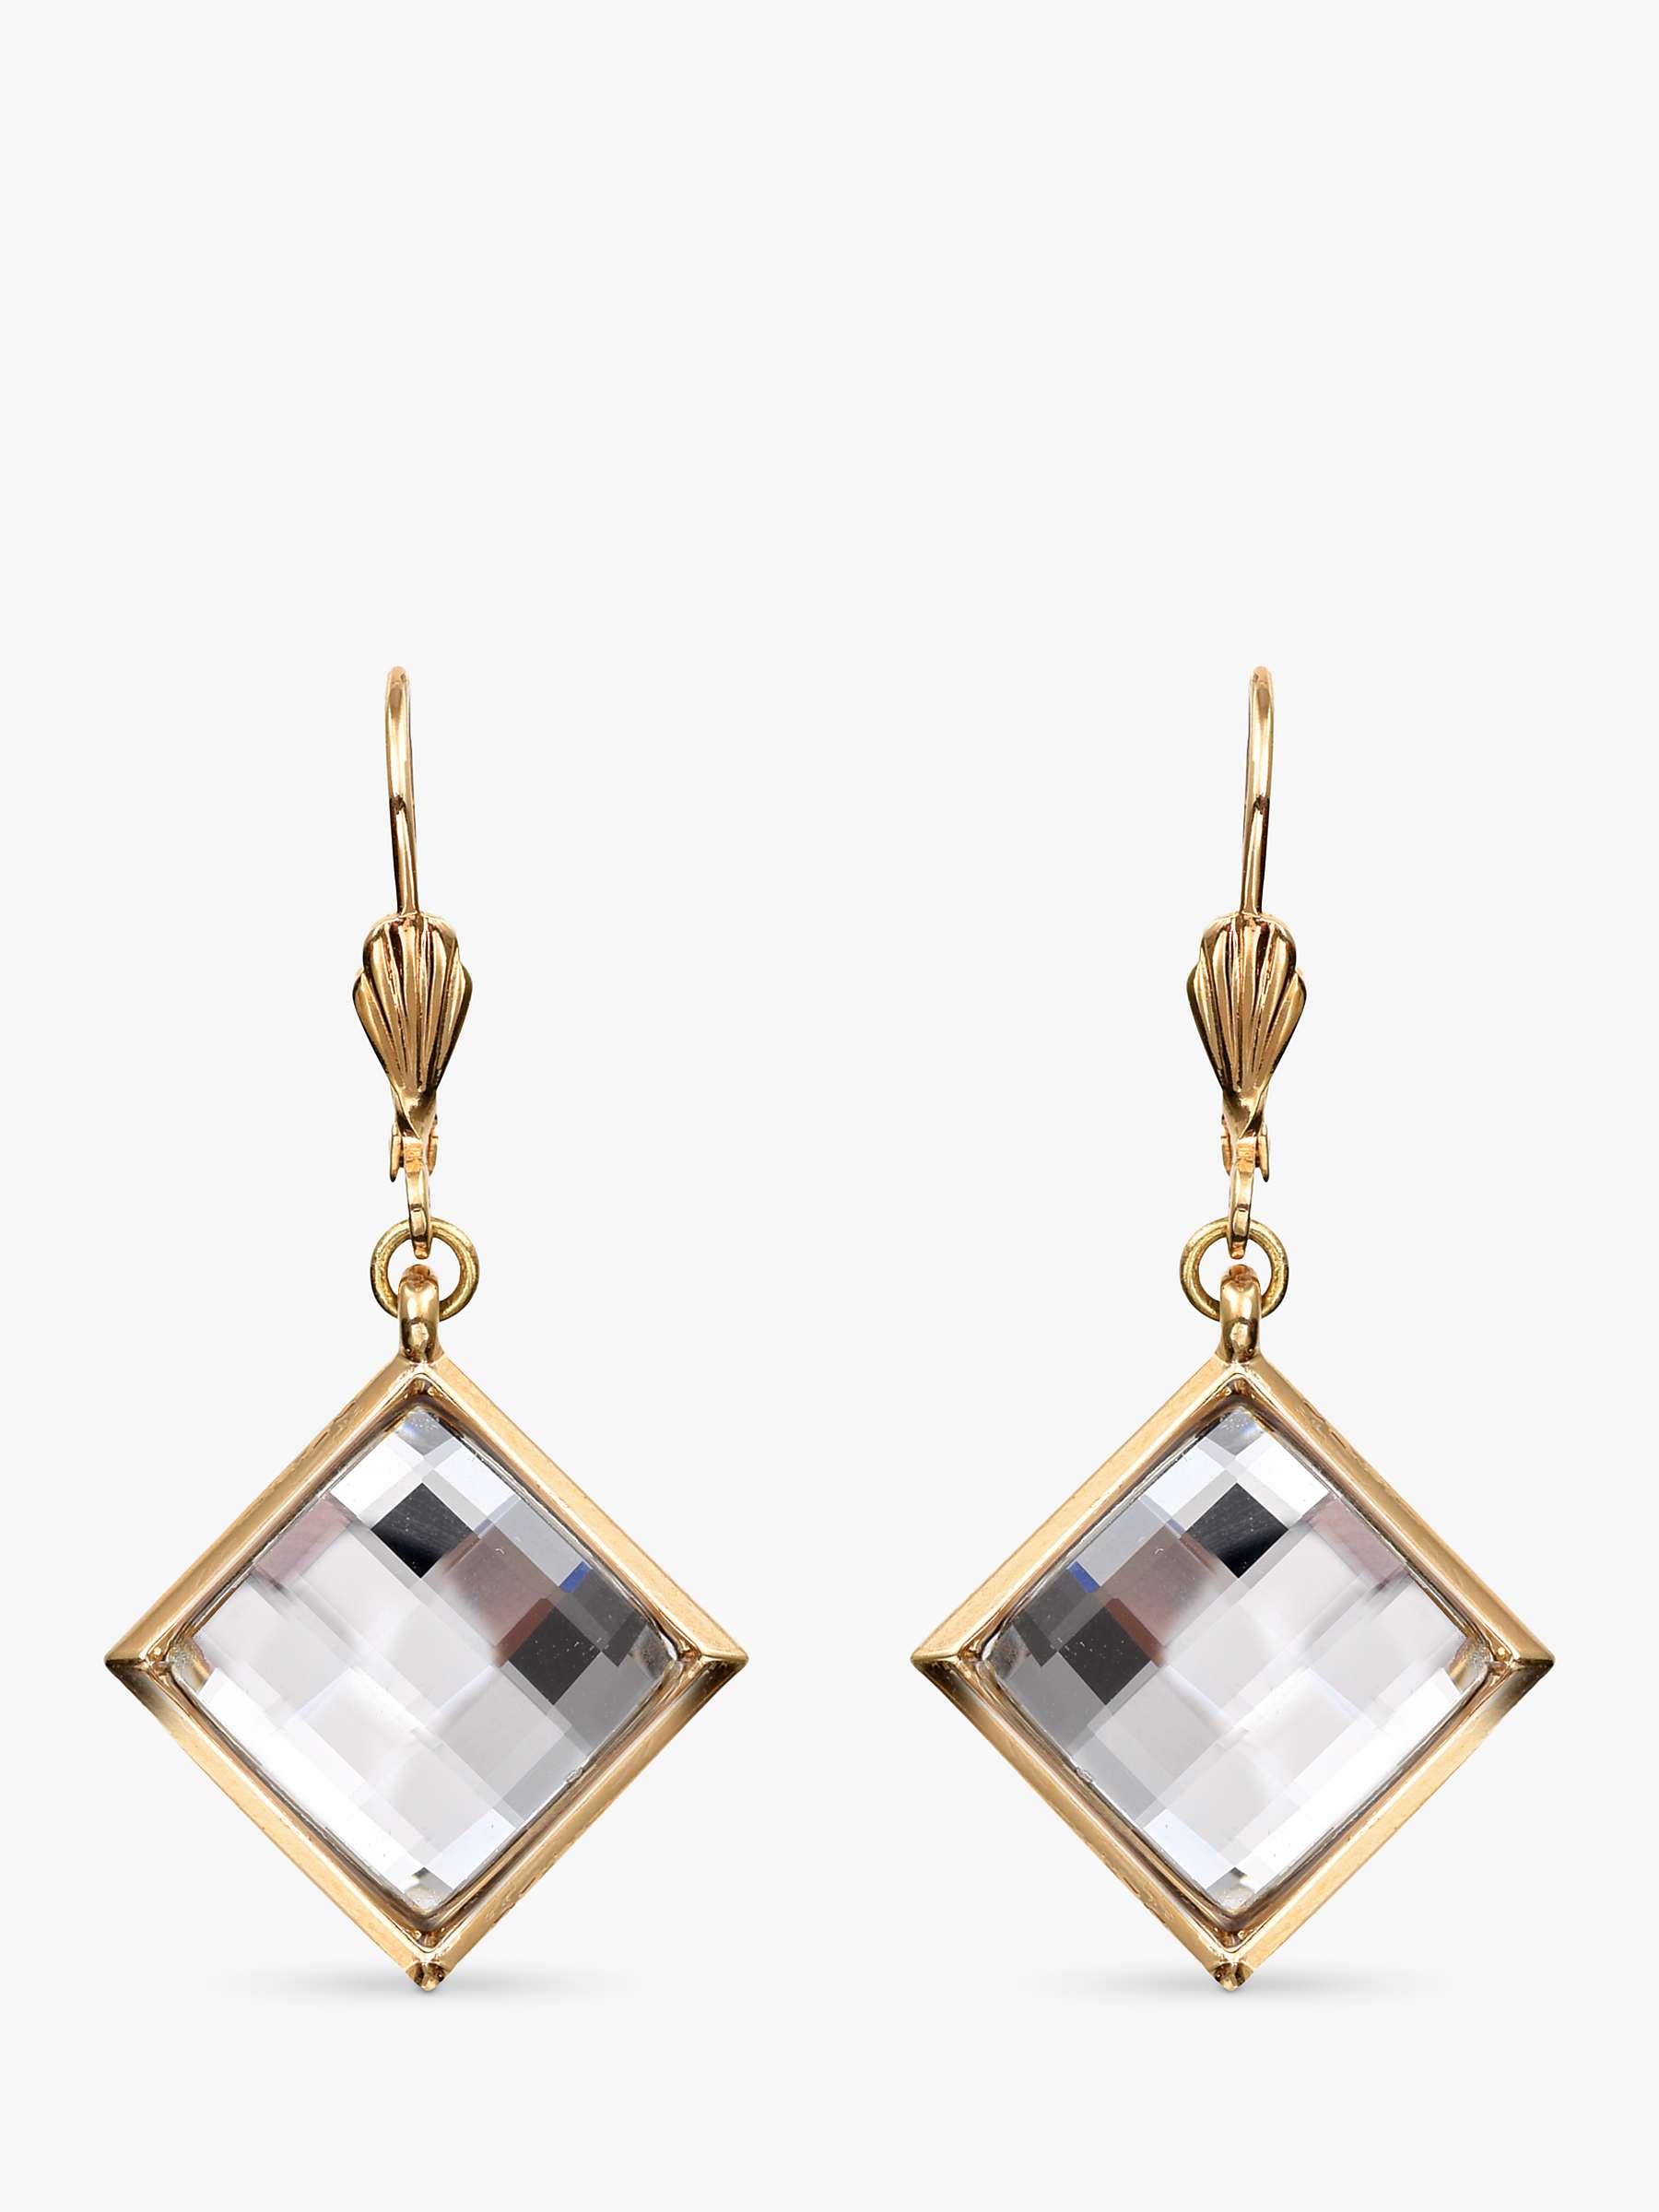 Buy Eclectica Vintage 18ct Gold Plated Mirrored Drop Earrings, Dated Circa 1990s, Gold Online at johnlewis.com